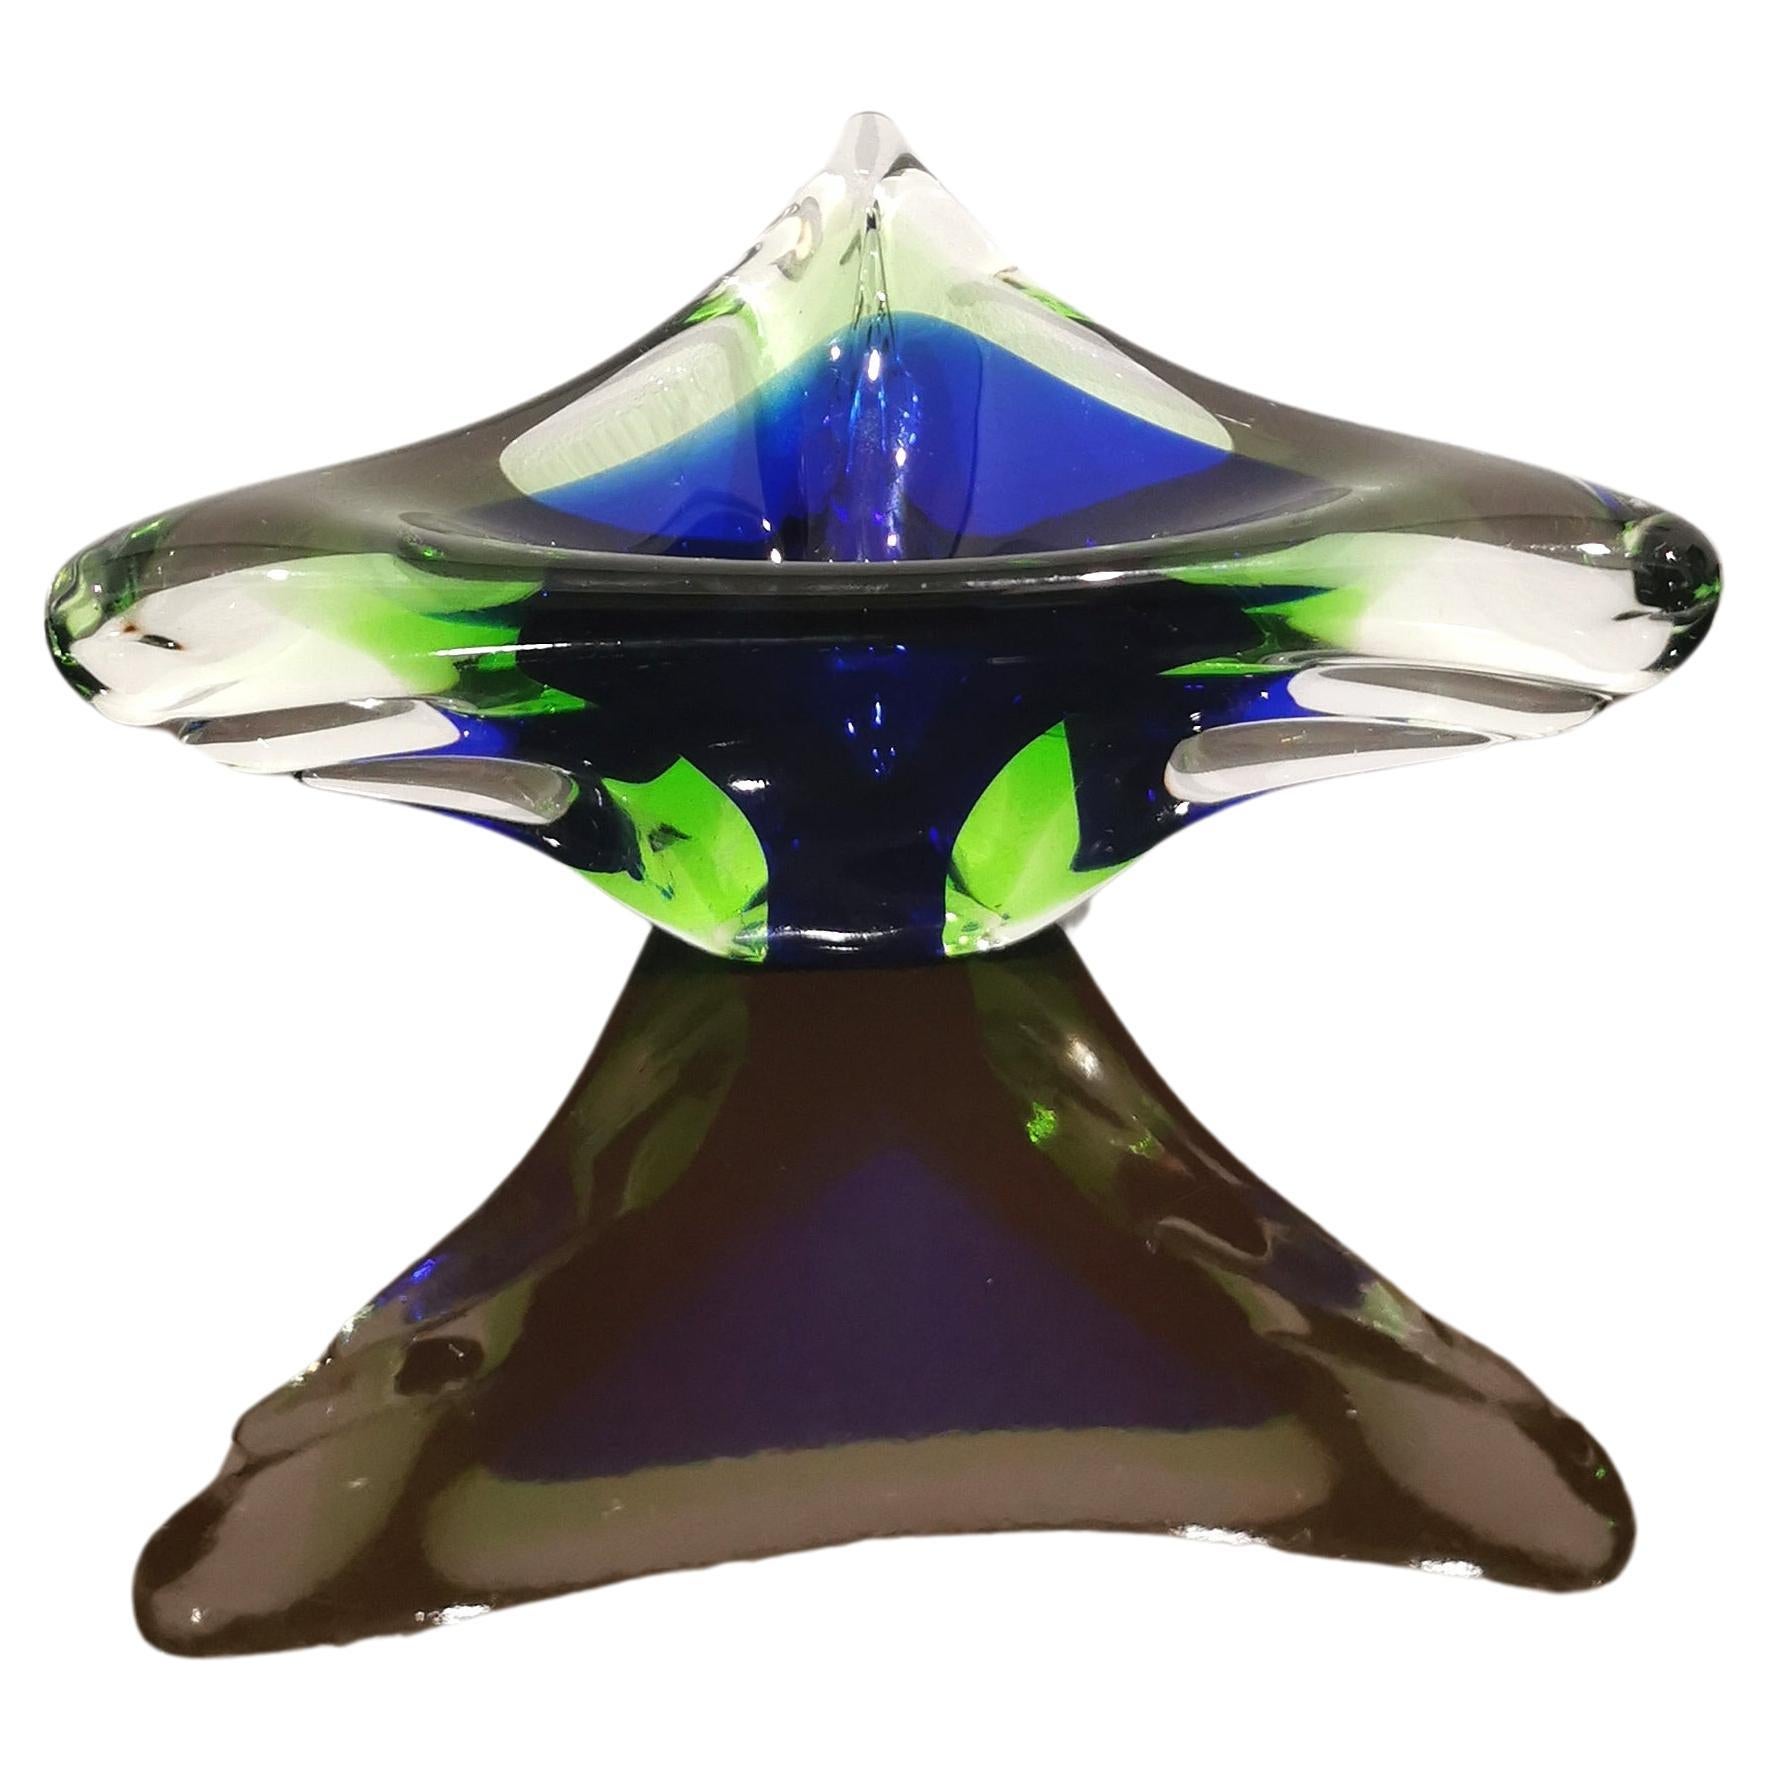 Vide-poche/decorative object produced in Italy in the 1970s. The triangular-shaped vide-poche was made of Murano glass in shades of midnight blue, bottle green and transparent with the famous 